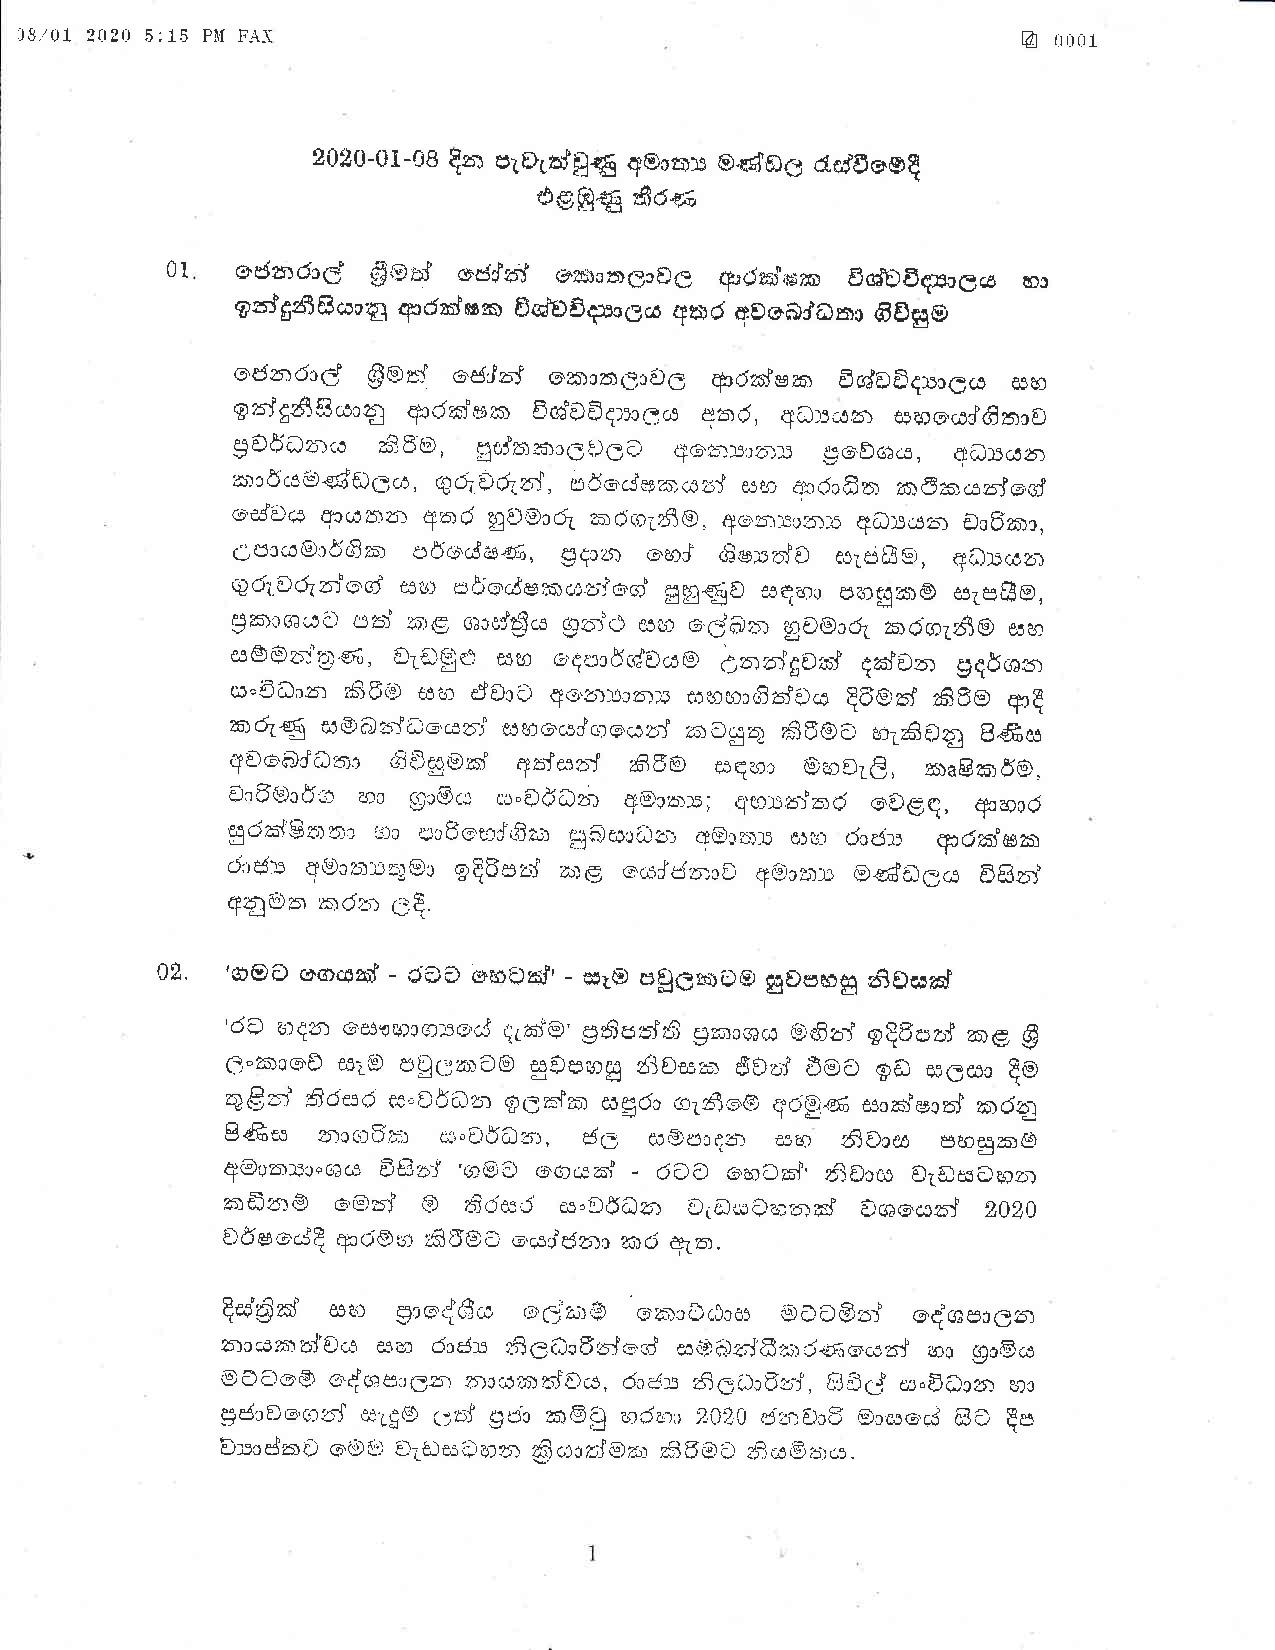 Cabinet Decision on 08.01.2020 page 001